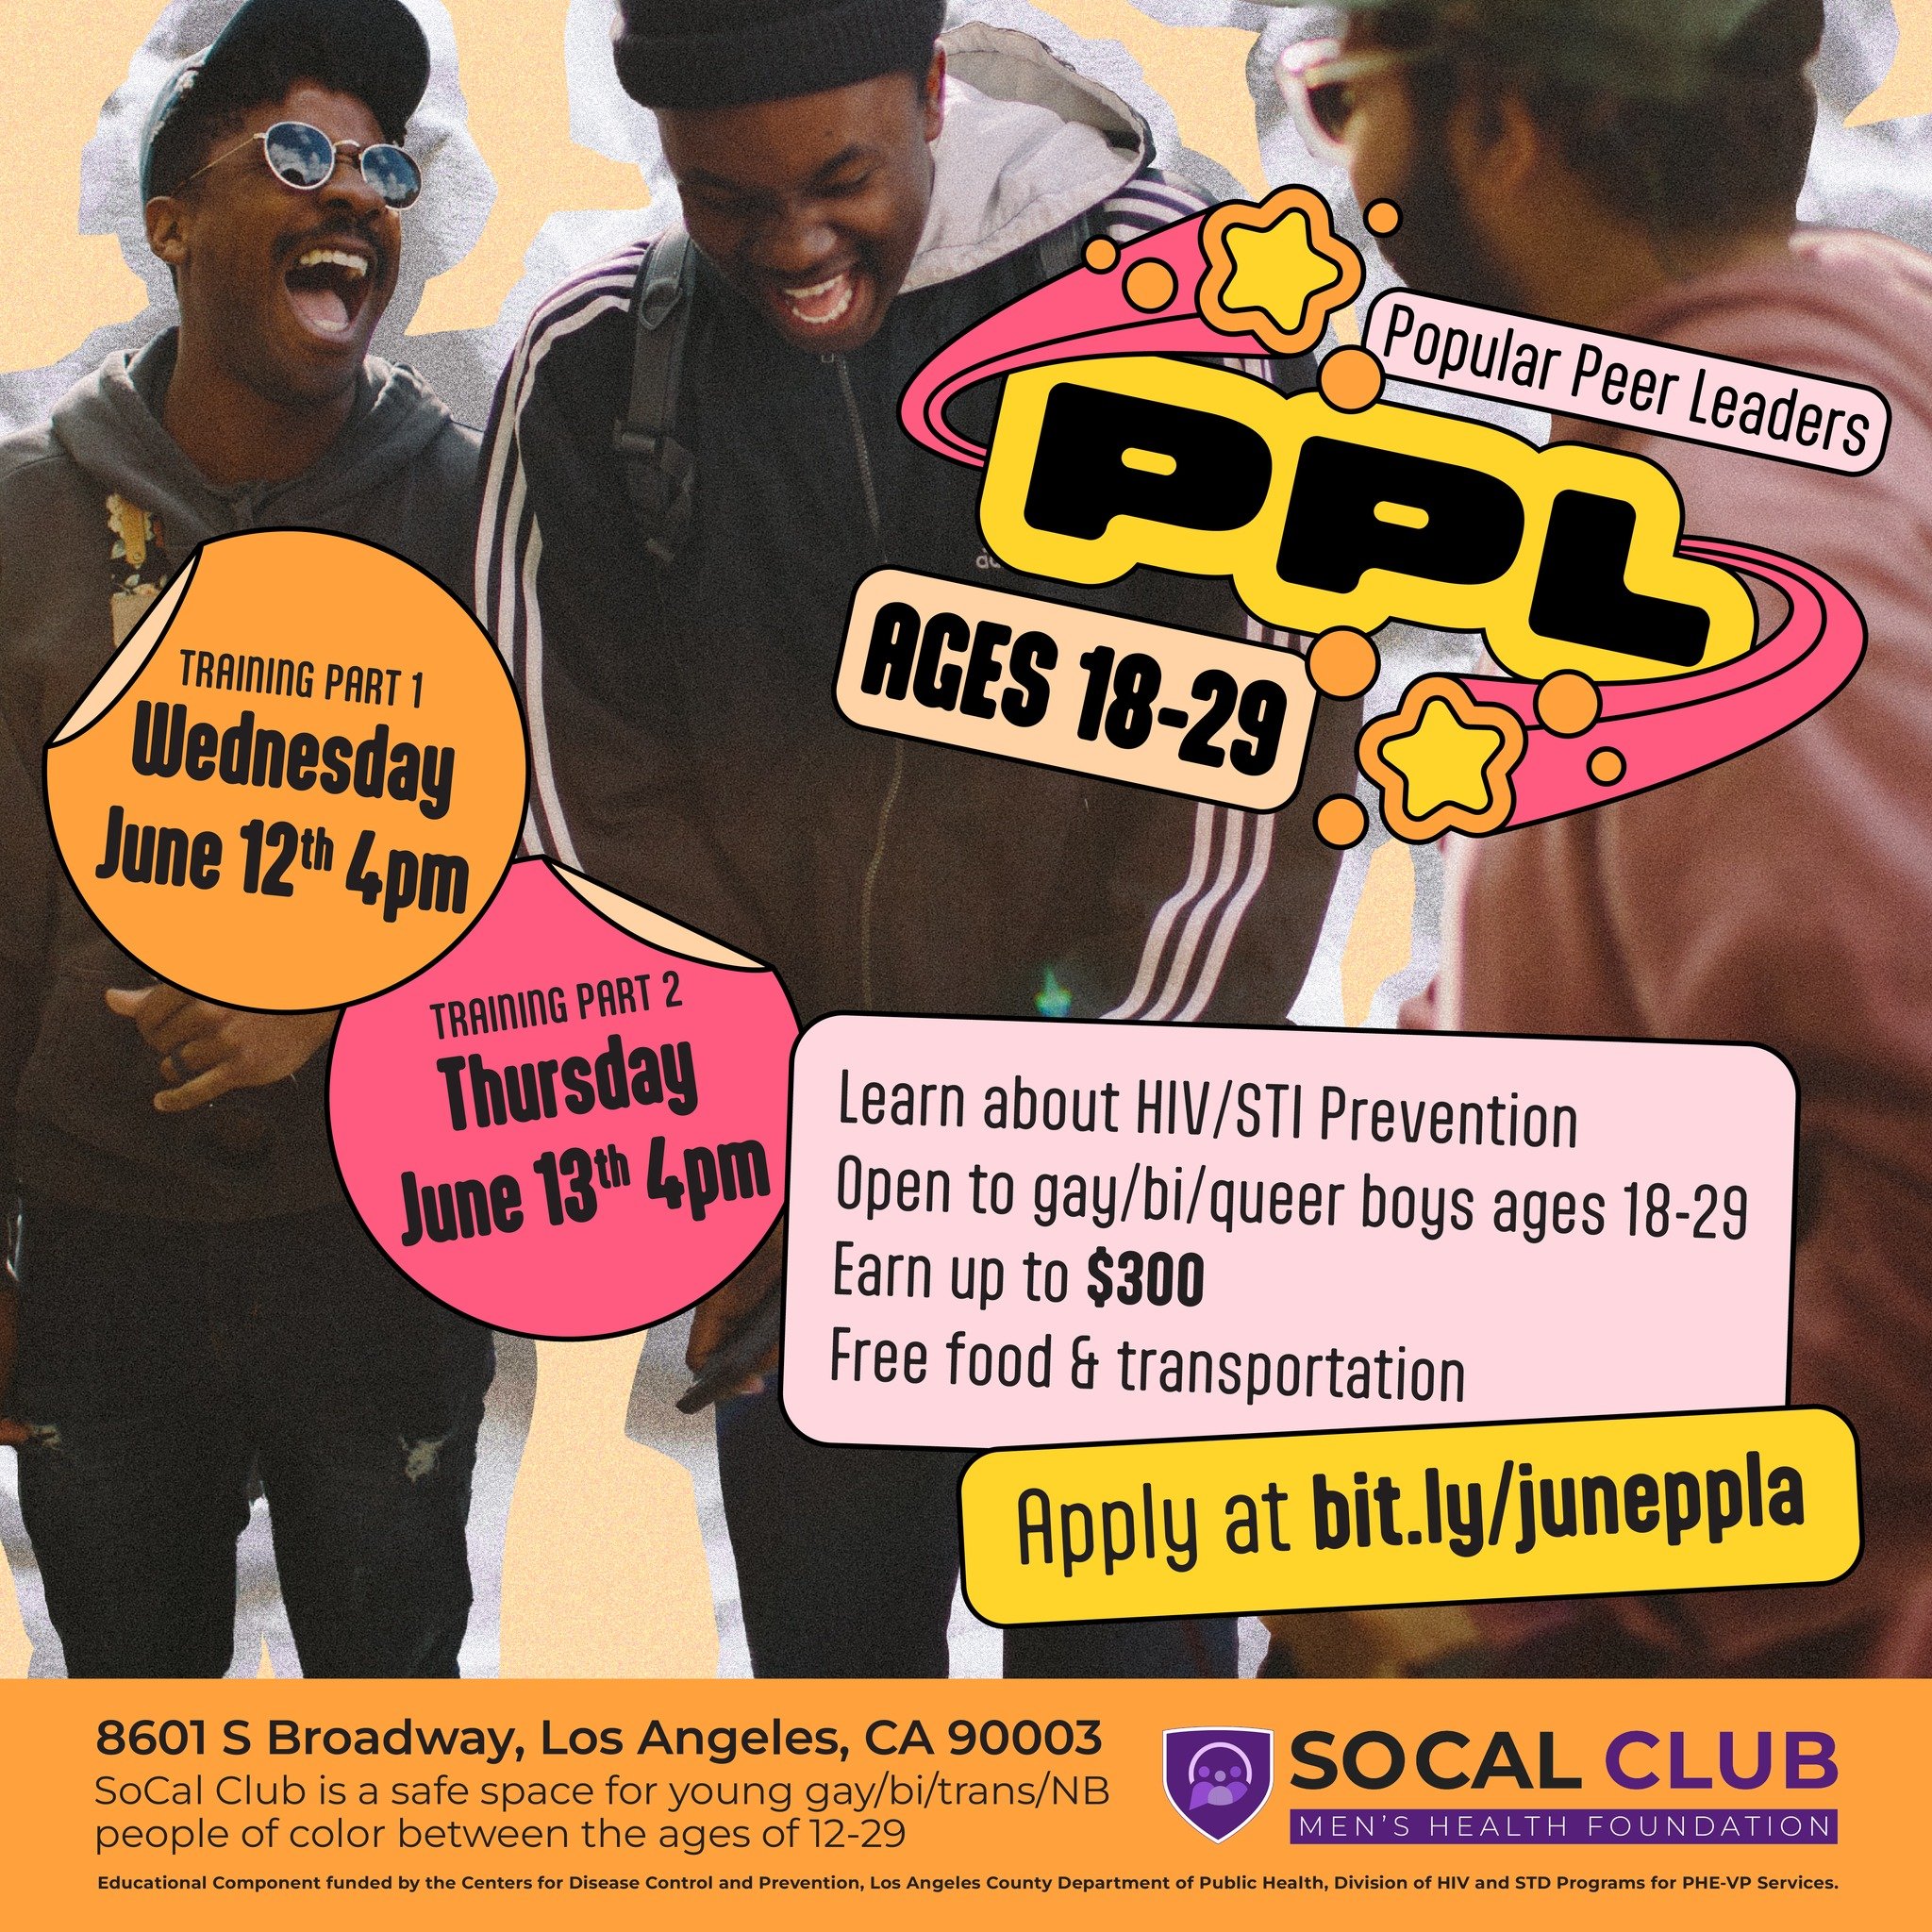 We're looking to train some sexual health superstars! 🦸 Earn up to $300 and enjoy free food and transportation for taking our Popular Peer Leader trainings on sexual health! 💛

Apply at bit.ly/juneppla 🔗

#ppl #sexualhealth #gayhealth #prevention 